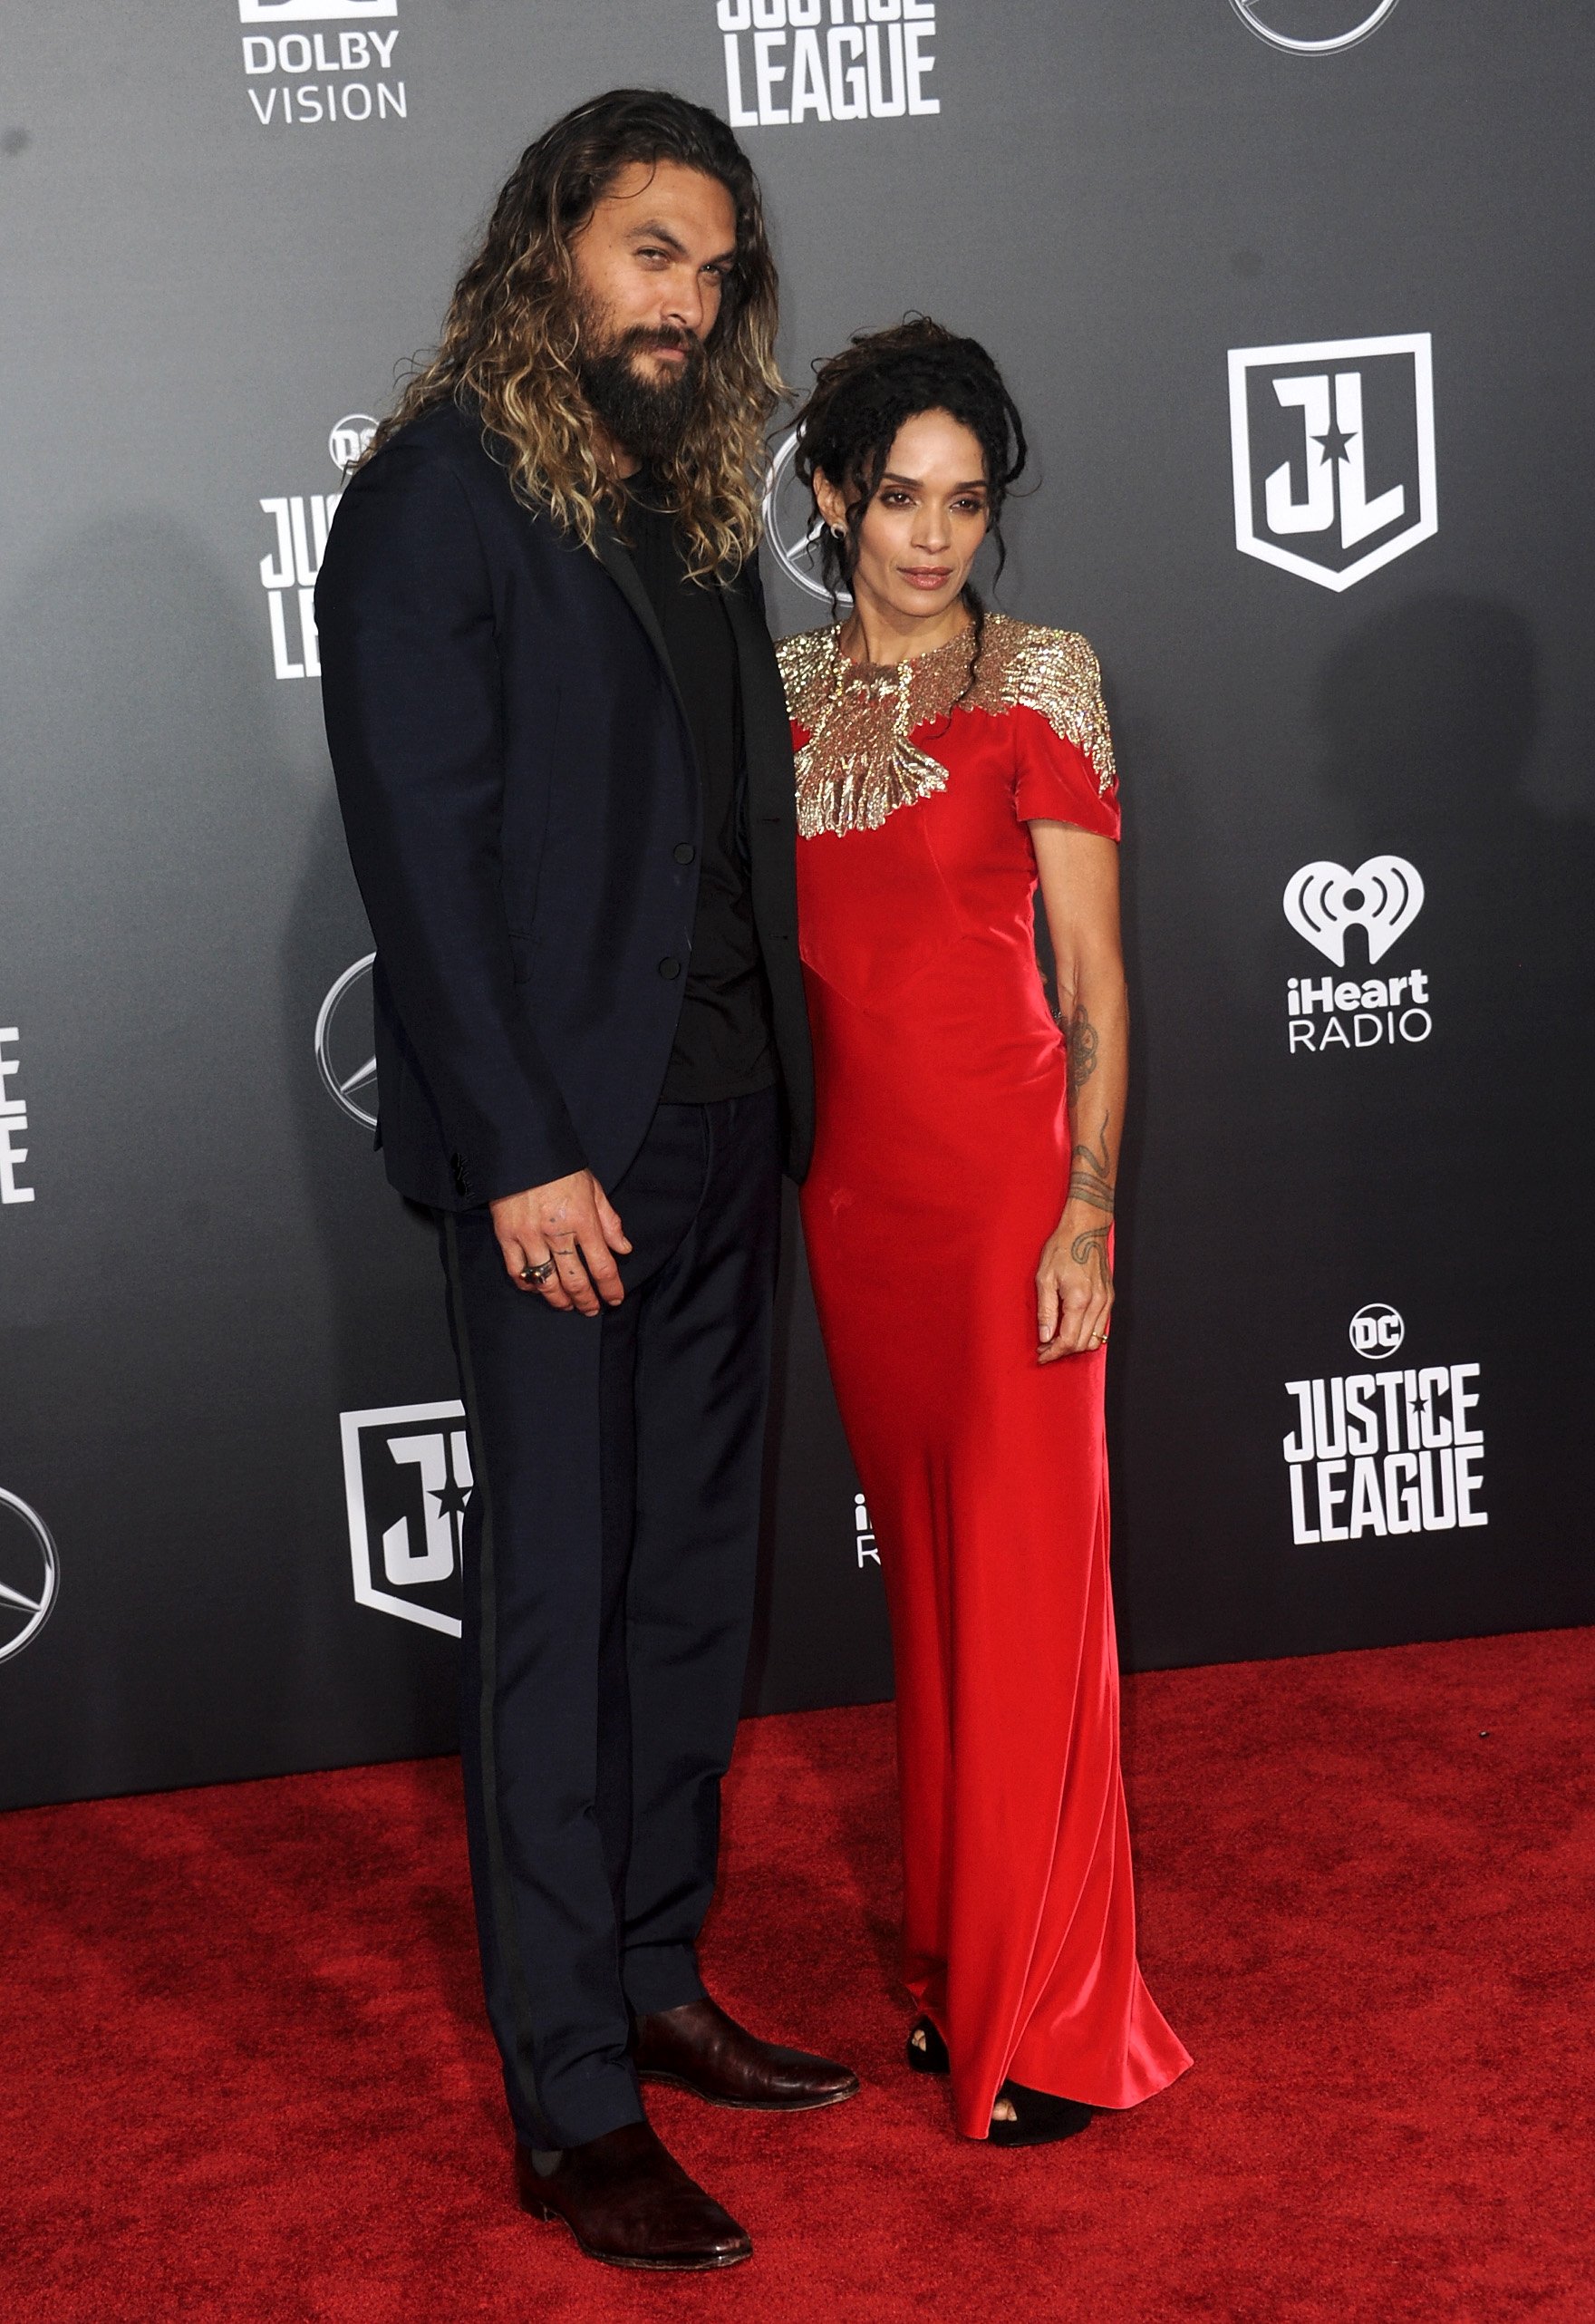 Jason Momoa and Lisa Bonet attend the premiere of "Justice League" in Hollywood, California on November 13, 2017 | Photo: Getty Images